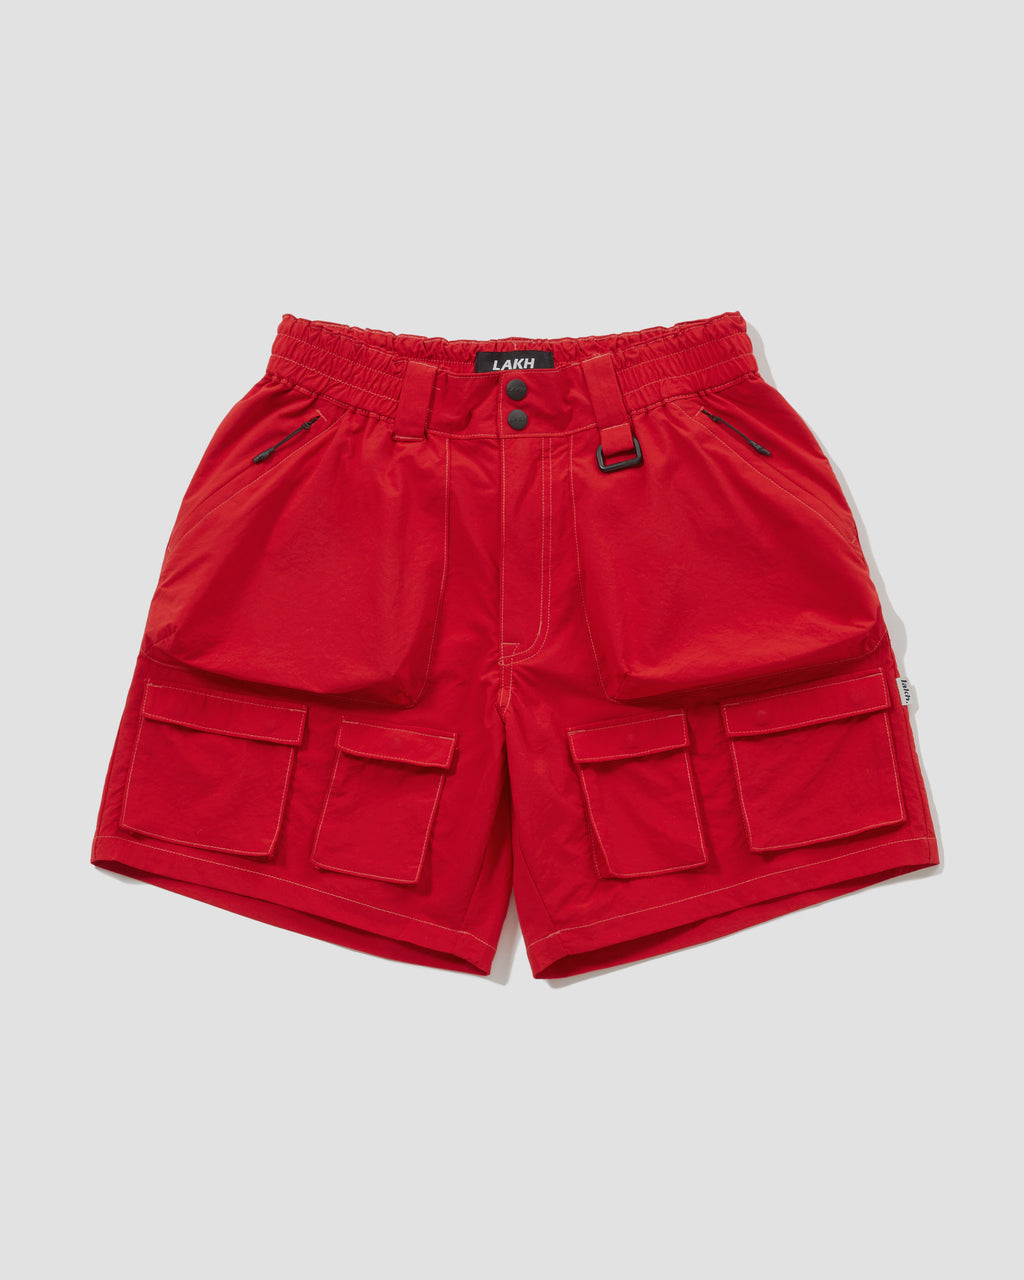 Gadget Shorts - Red